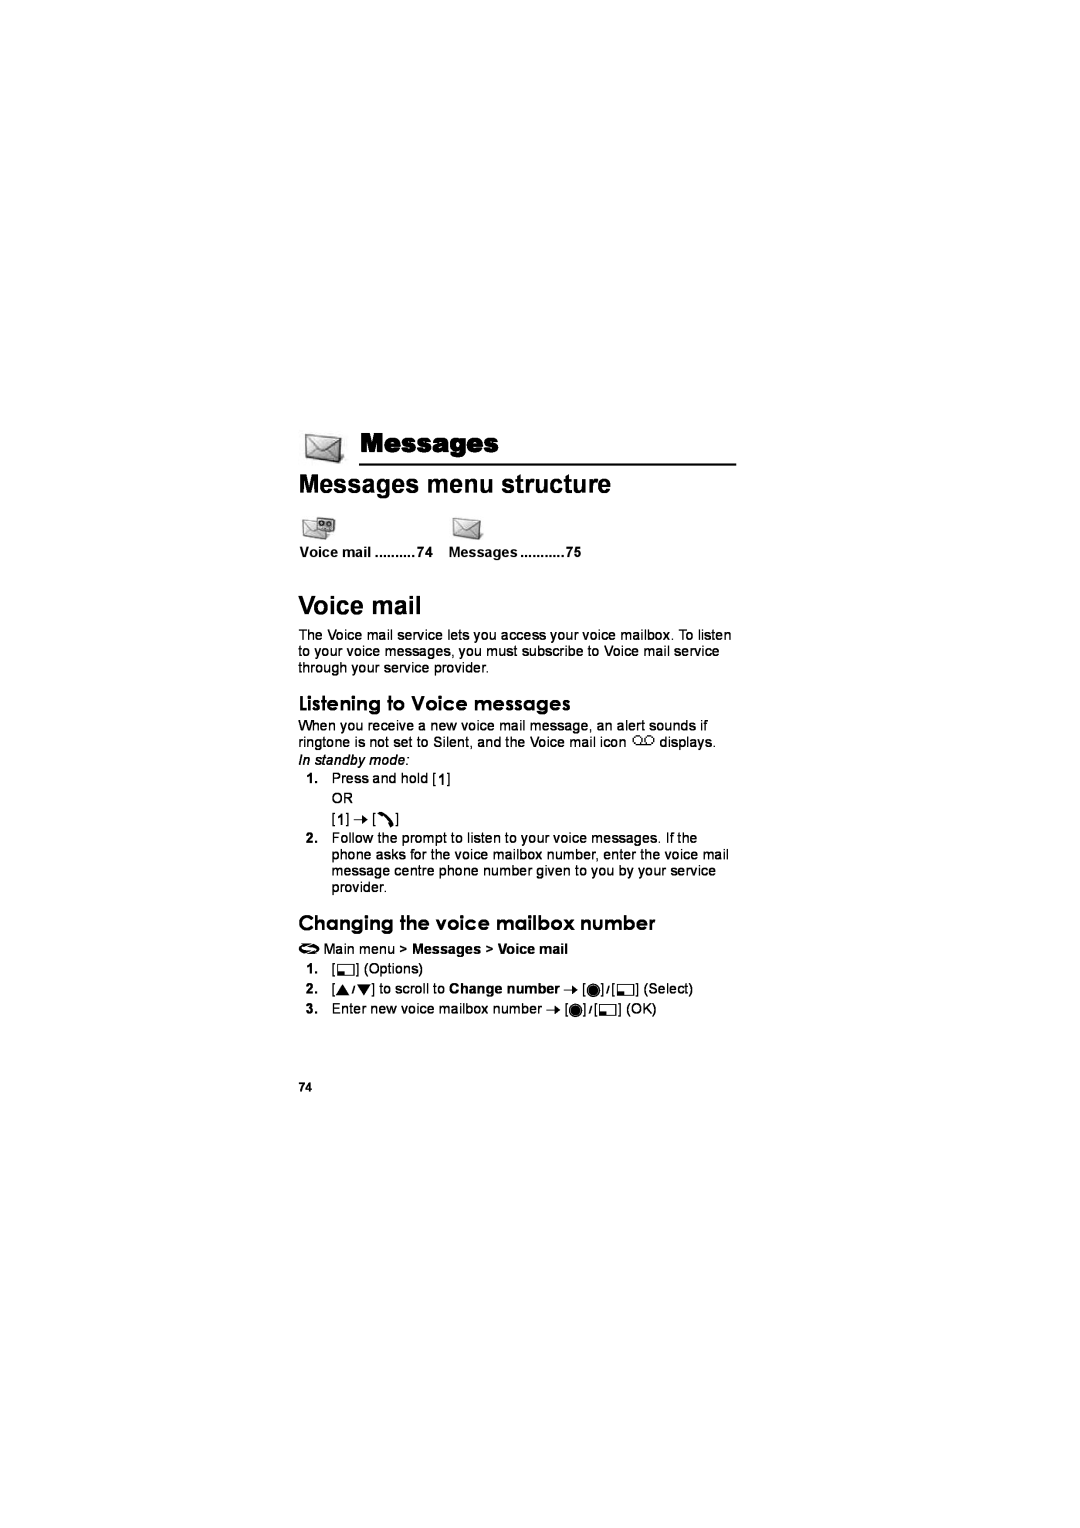 Panasonic EB-X800 Messages menu structure, Listening to Voice messages, Changing the voice mailbox number, Voice mail 